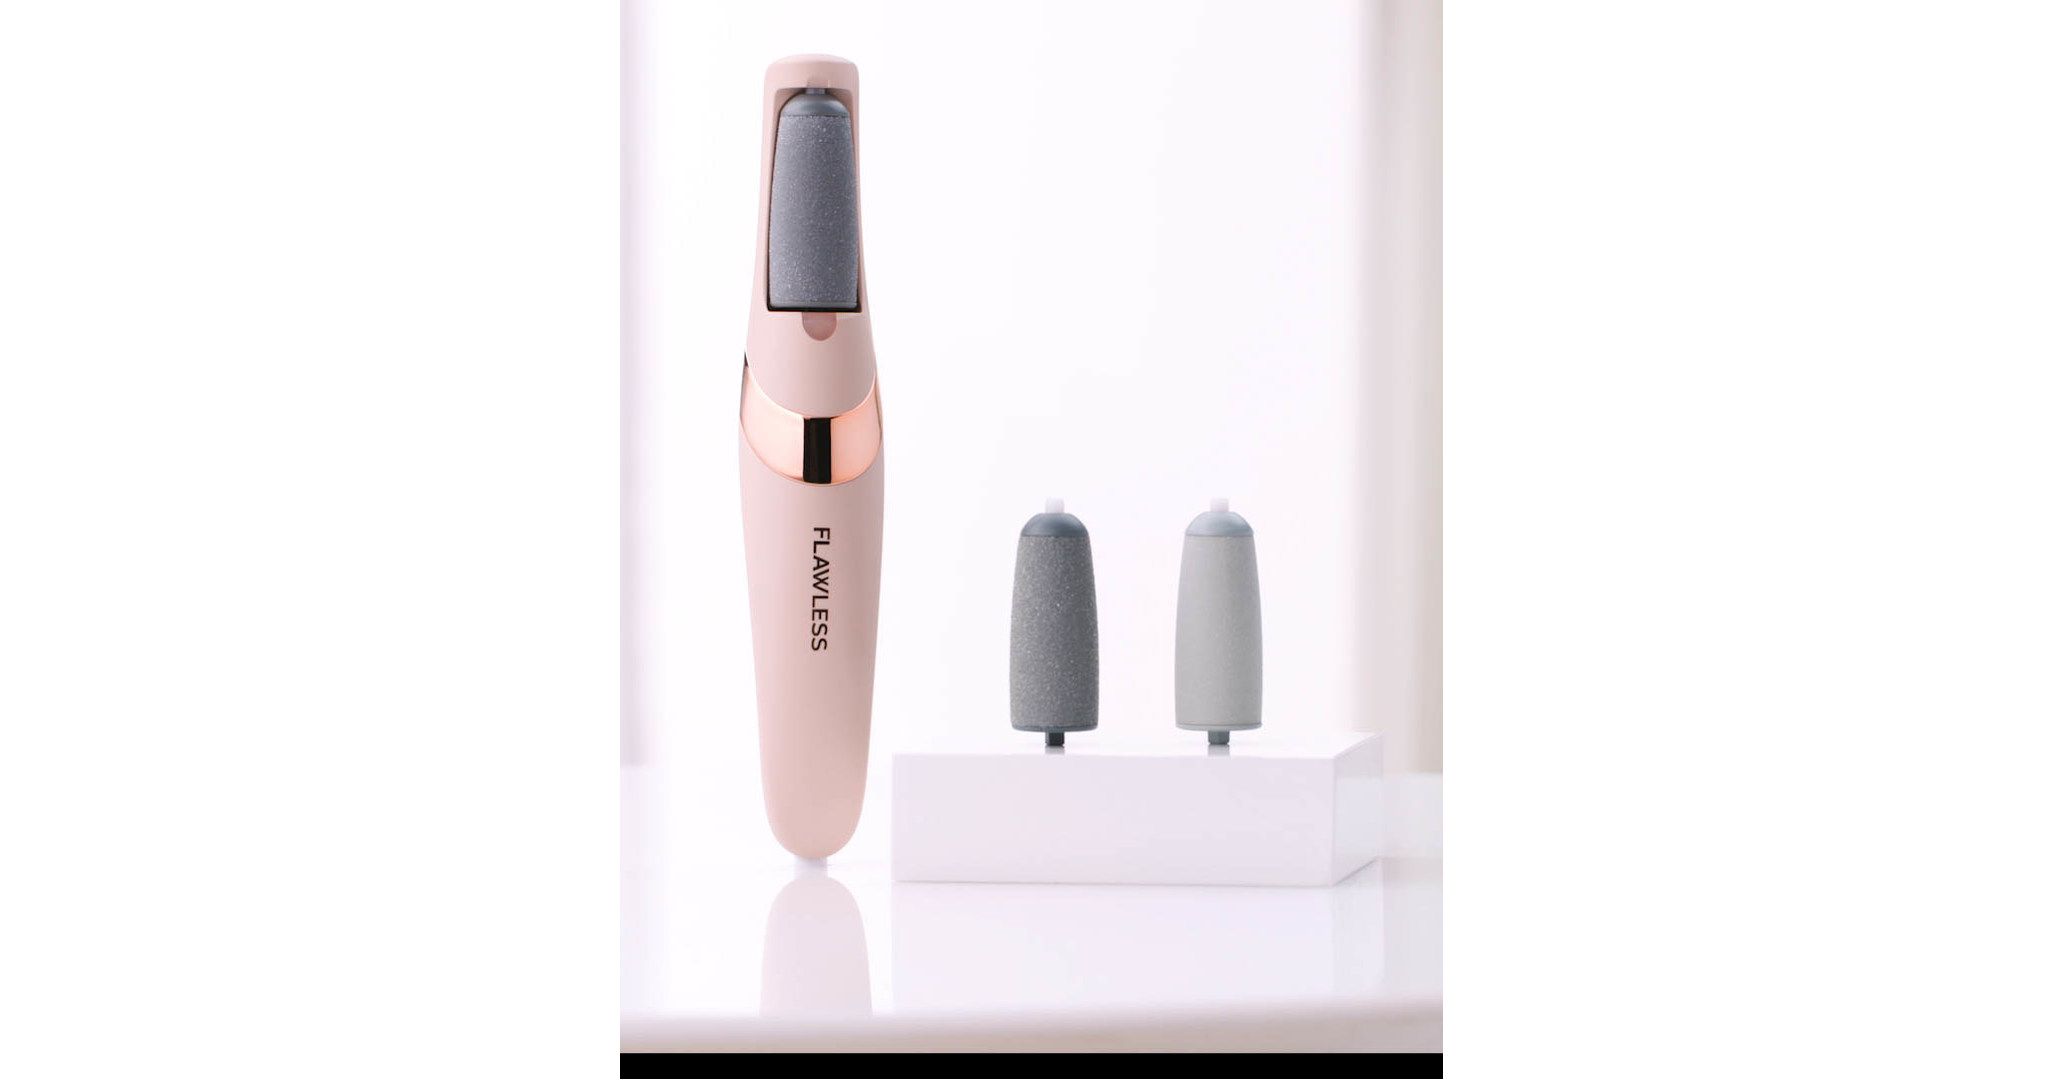 Finishing Touch Flawless Launches Fourth Beauty Device in Four Months